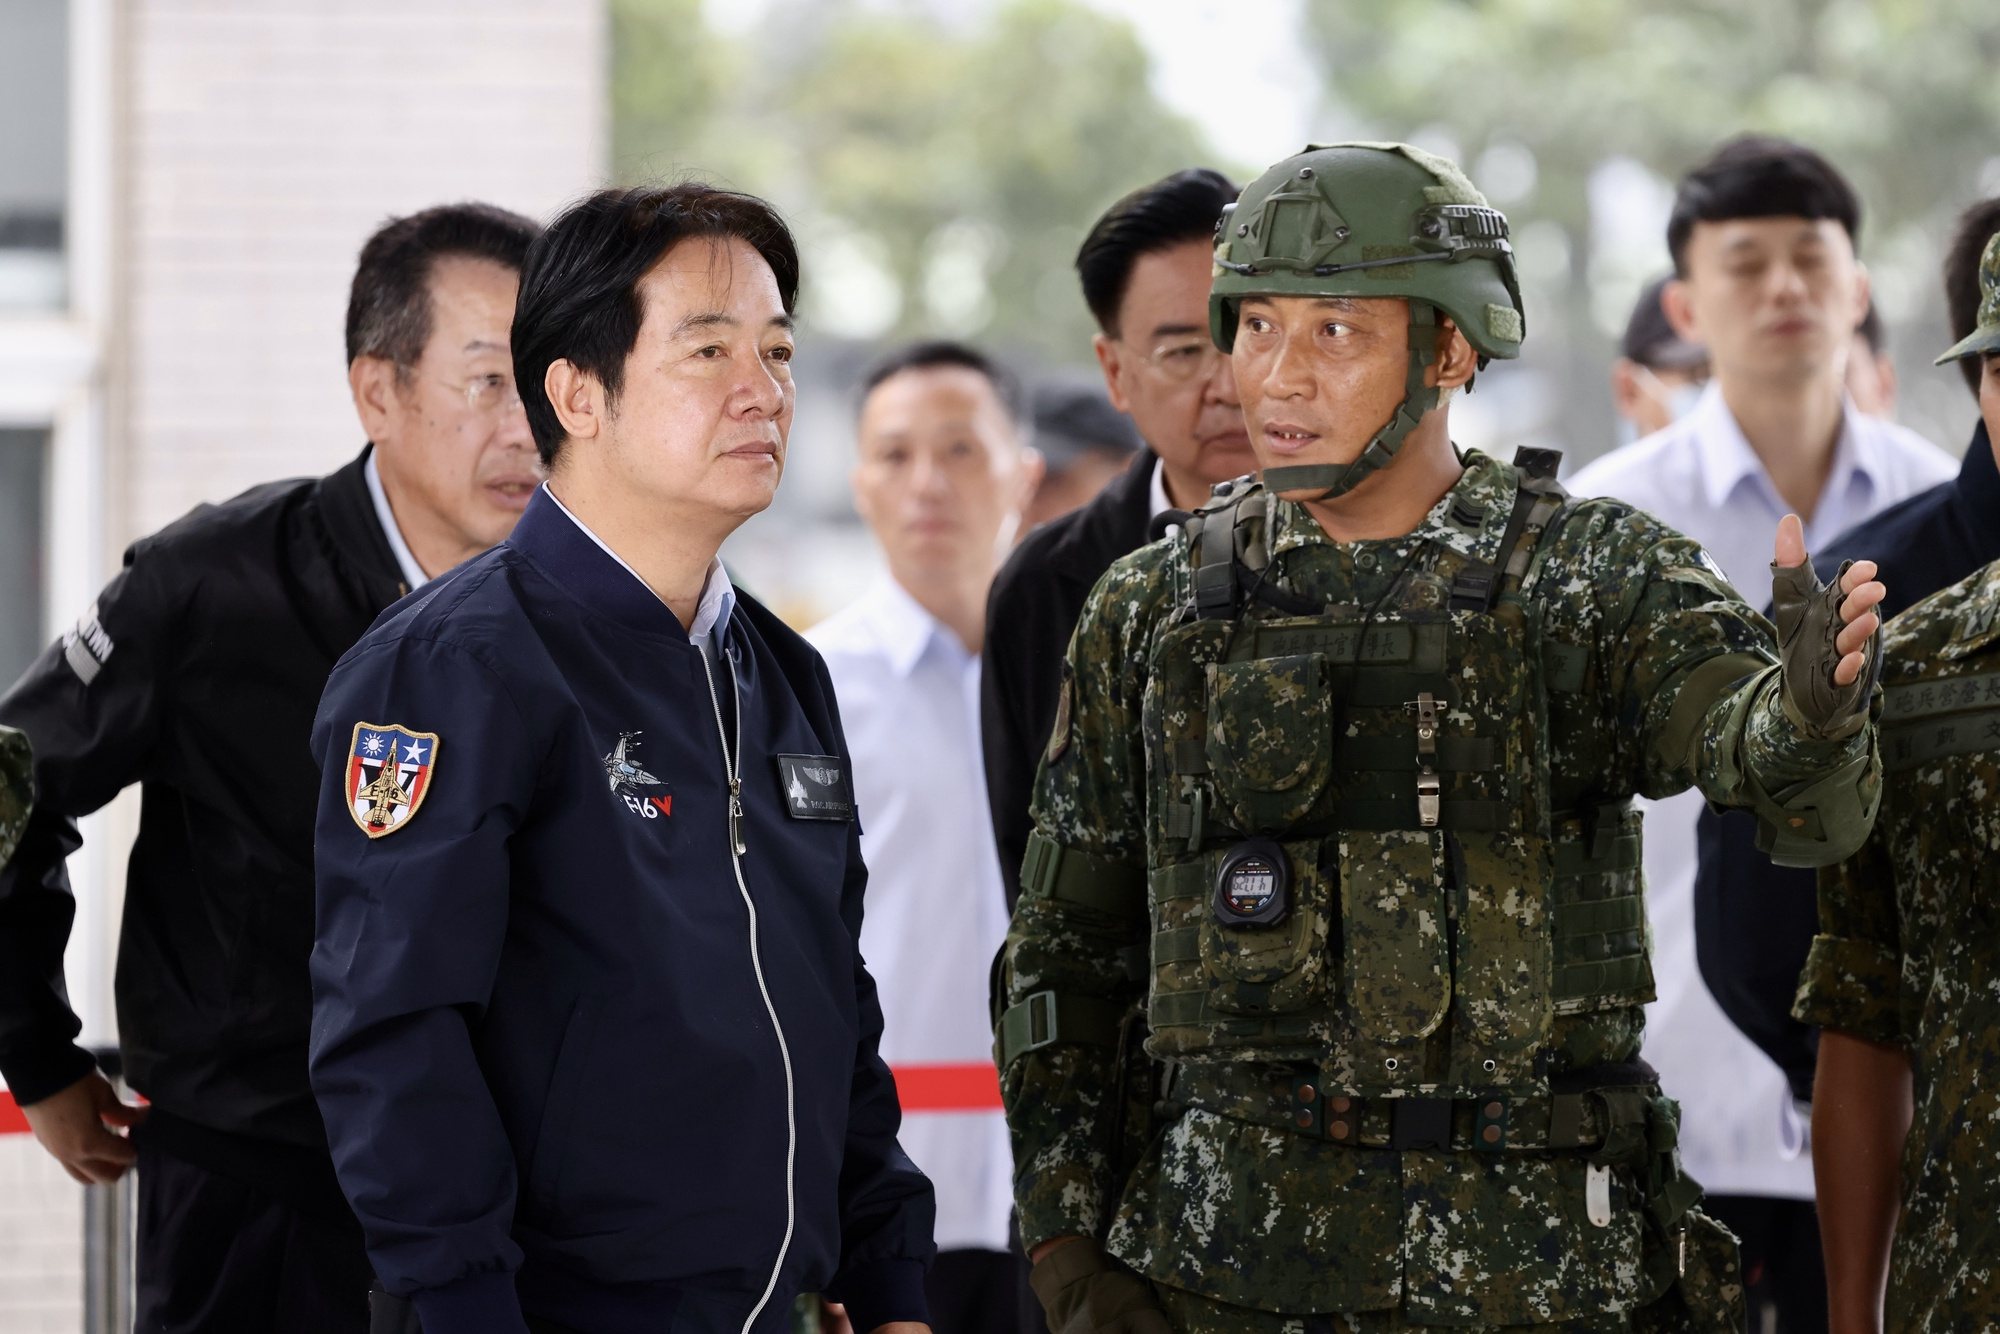 epa11374580 Taiwan President William Lai (Lai Ching-te) (L), inspects army personnel during his visit inside military base in Haulien, Taiwan, 28 May 2024. During the visit, Lai gave thanks for the efforts and respect of the Taiwanese armed forces, specifically in reference to the recently concluded Chinese military exercise that encircled Taiwan.  EPA/RITCHIE B. TONGO